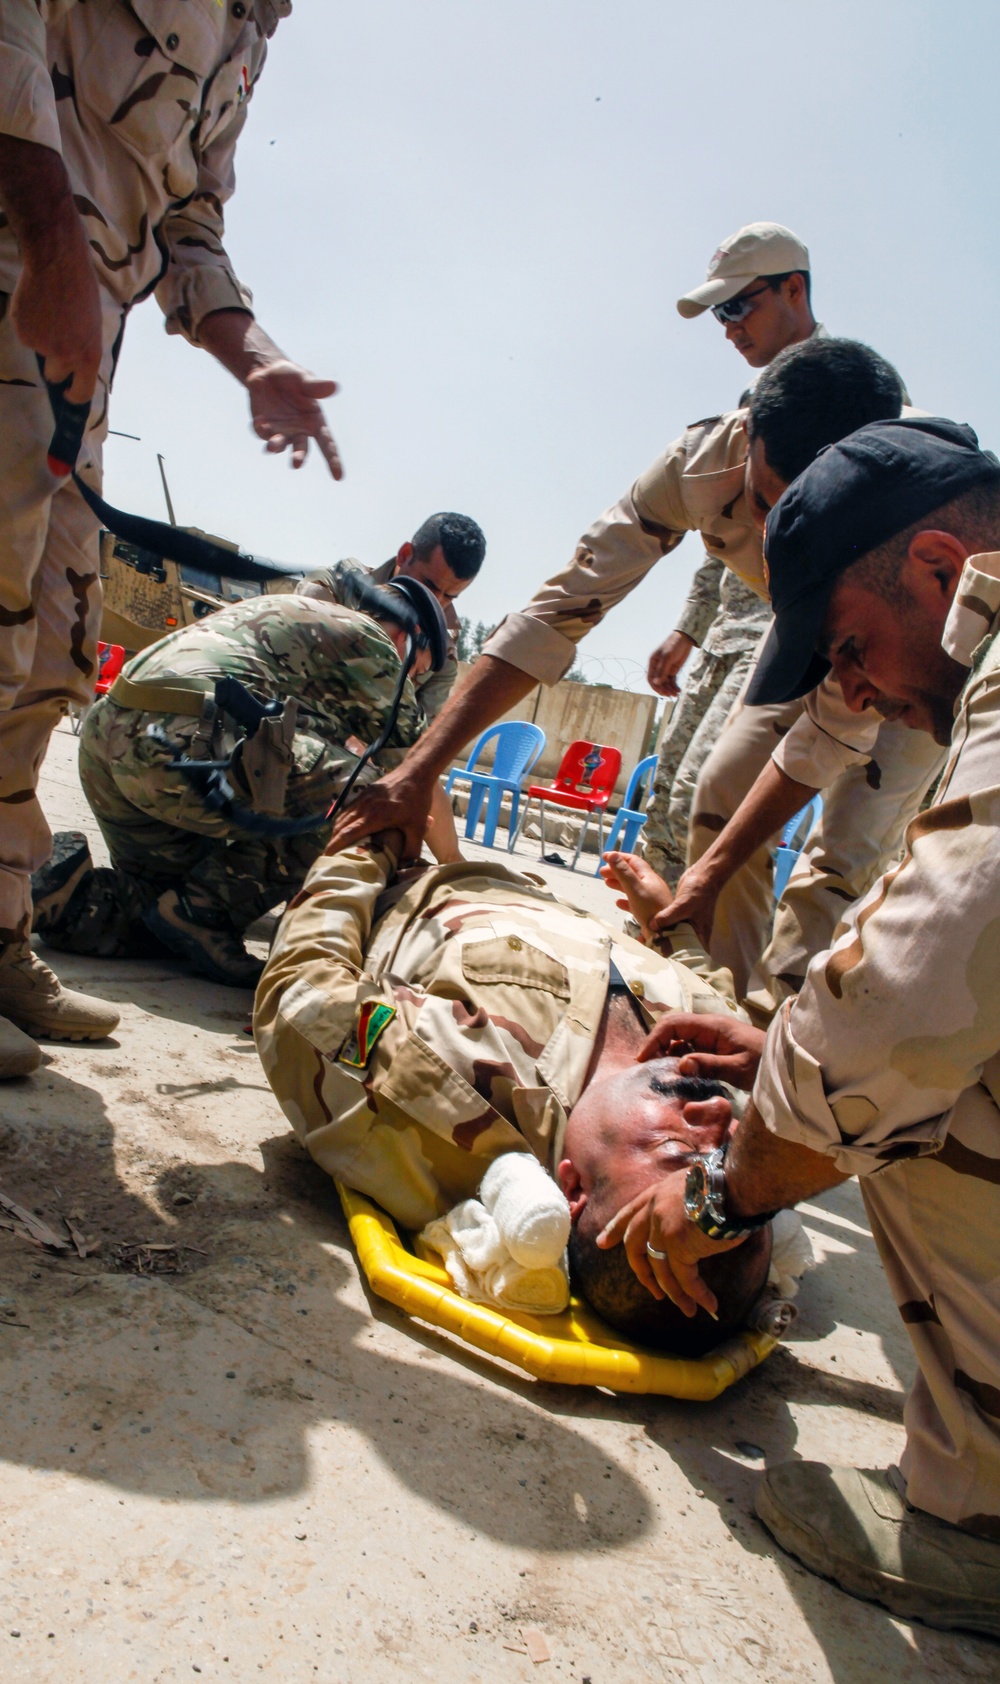 Task Group Taji trains Iraqi security forces during combat medical course